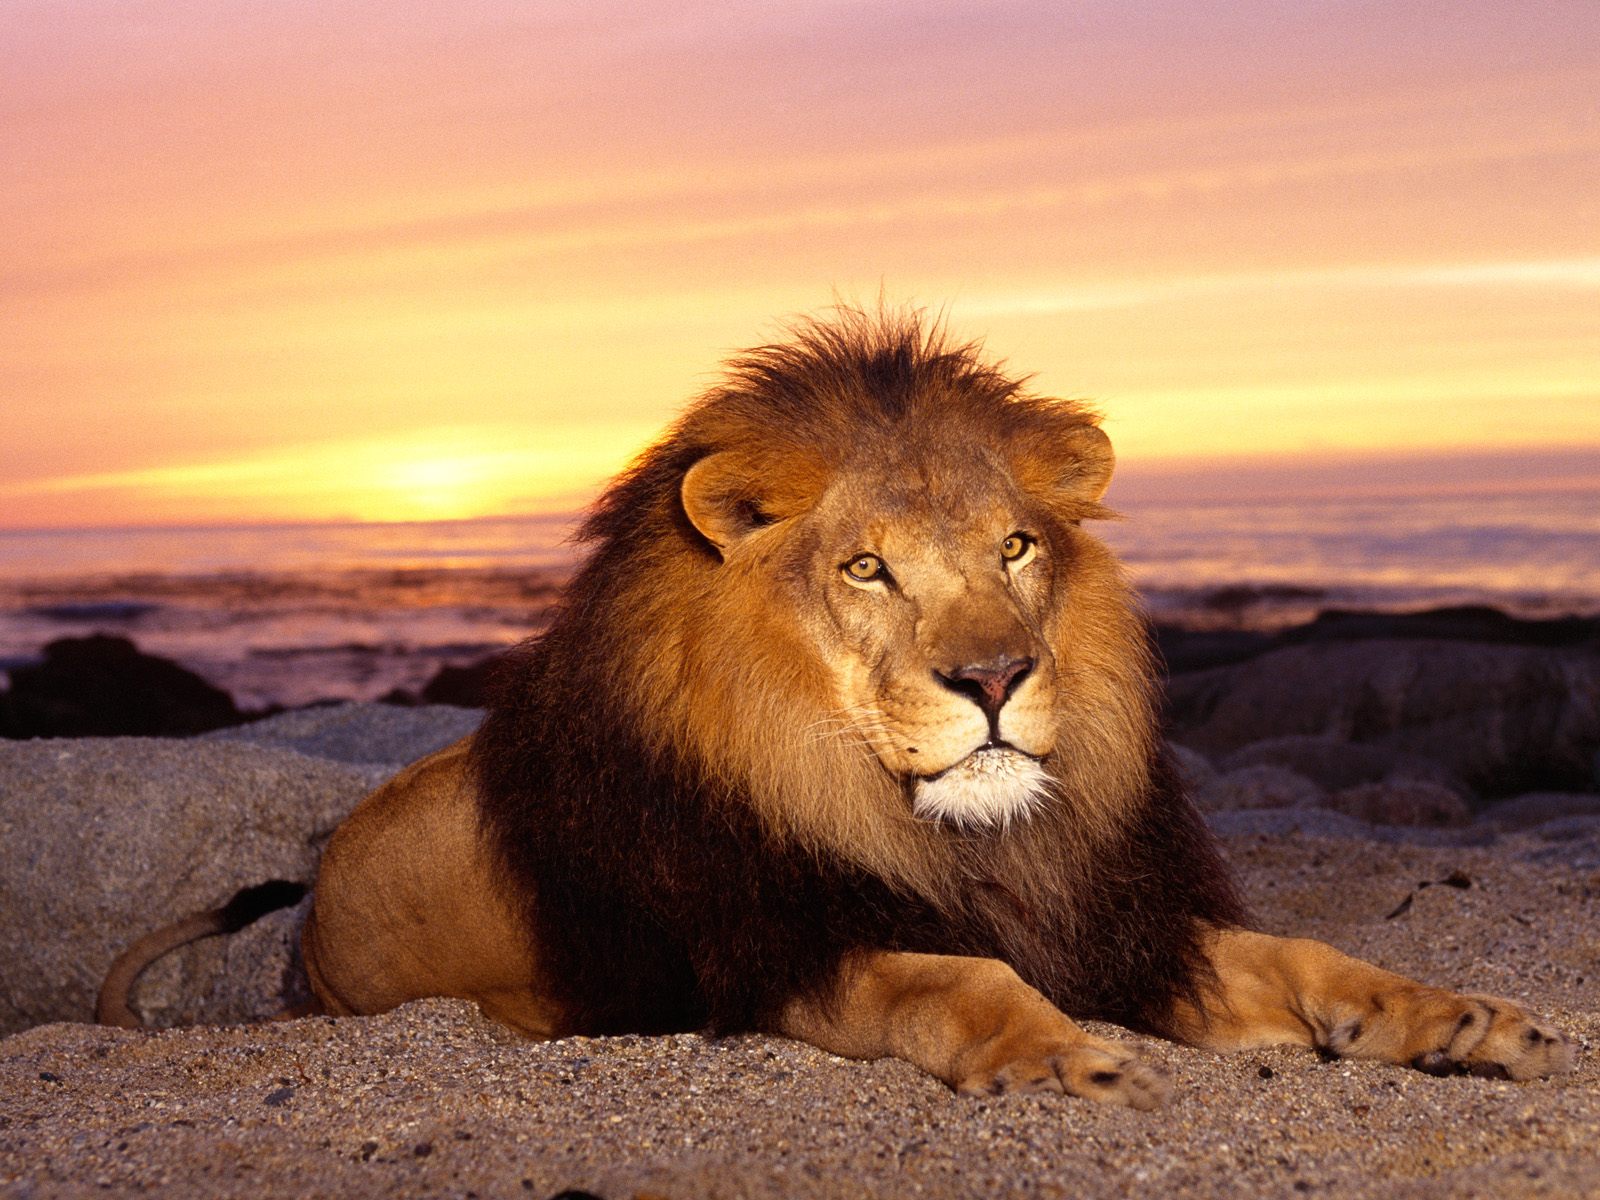 Lion Desktop Wallpapers for HD Widescreen and Mobile 1600x1200